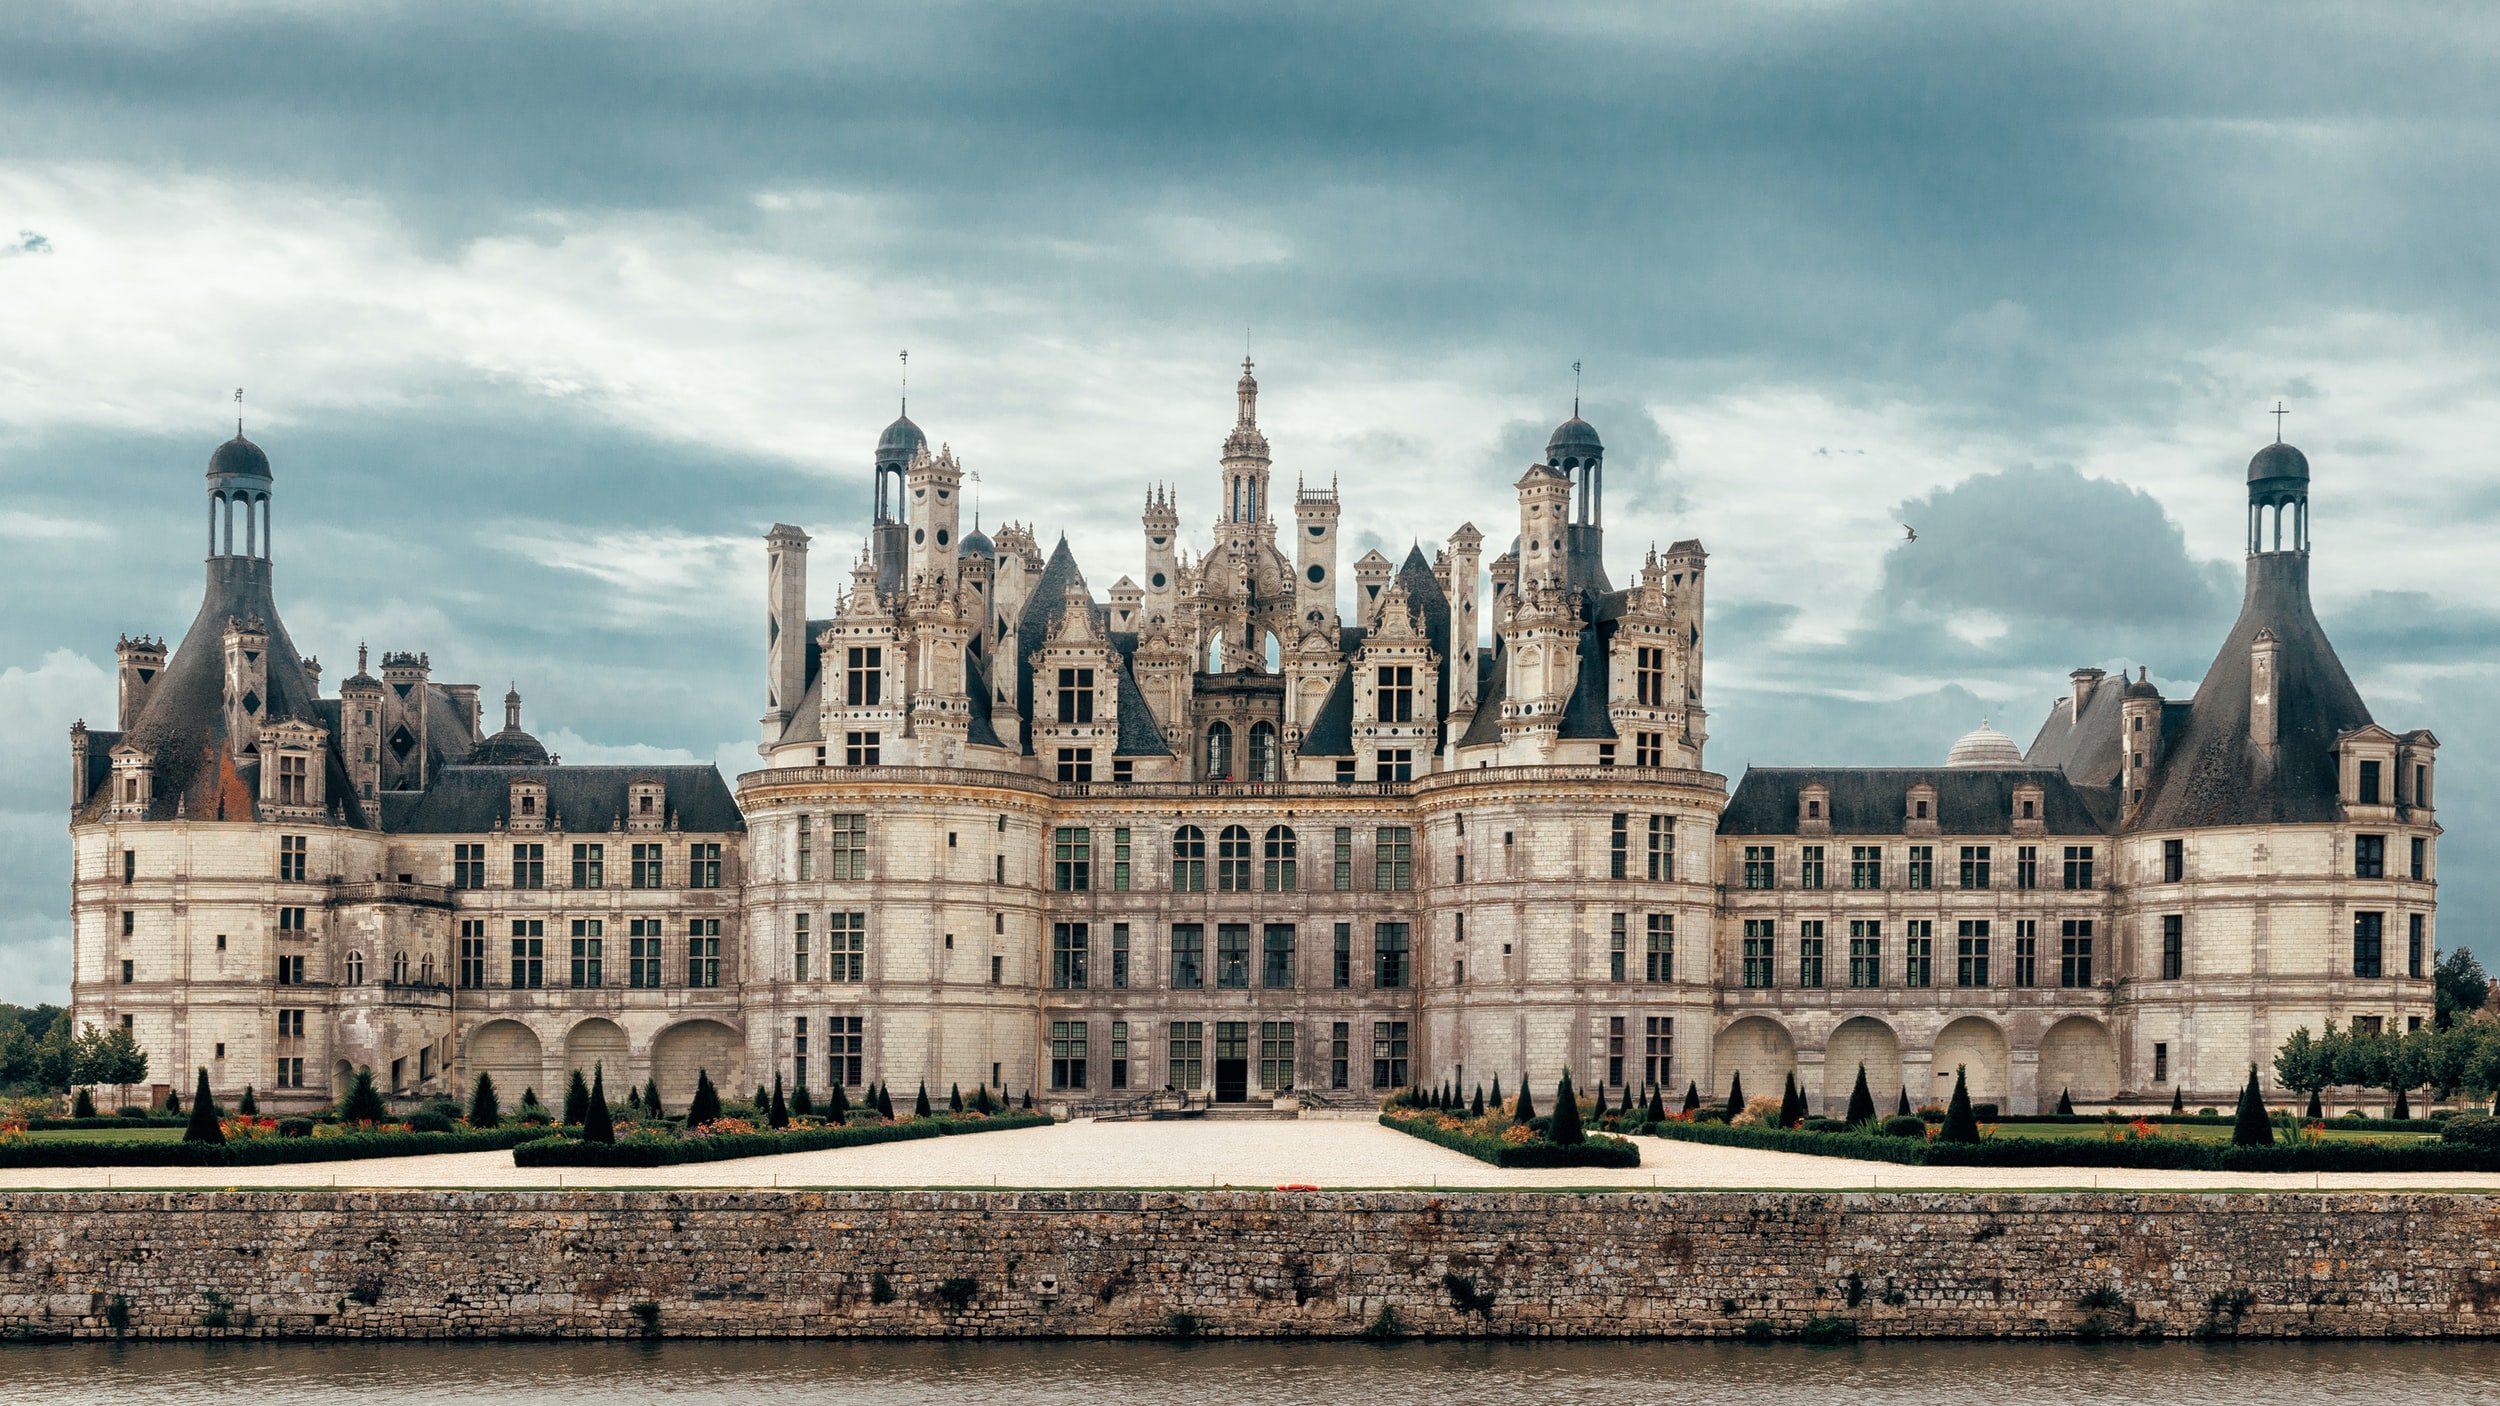 Visit the Château de Chambord during your company seminar